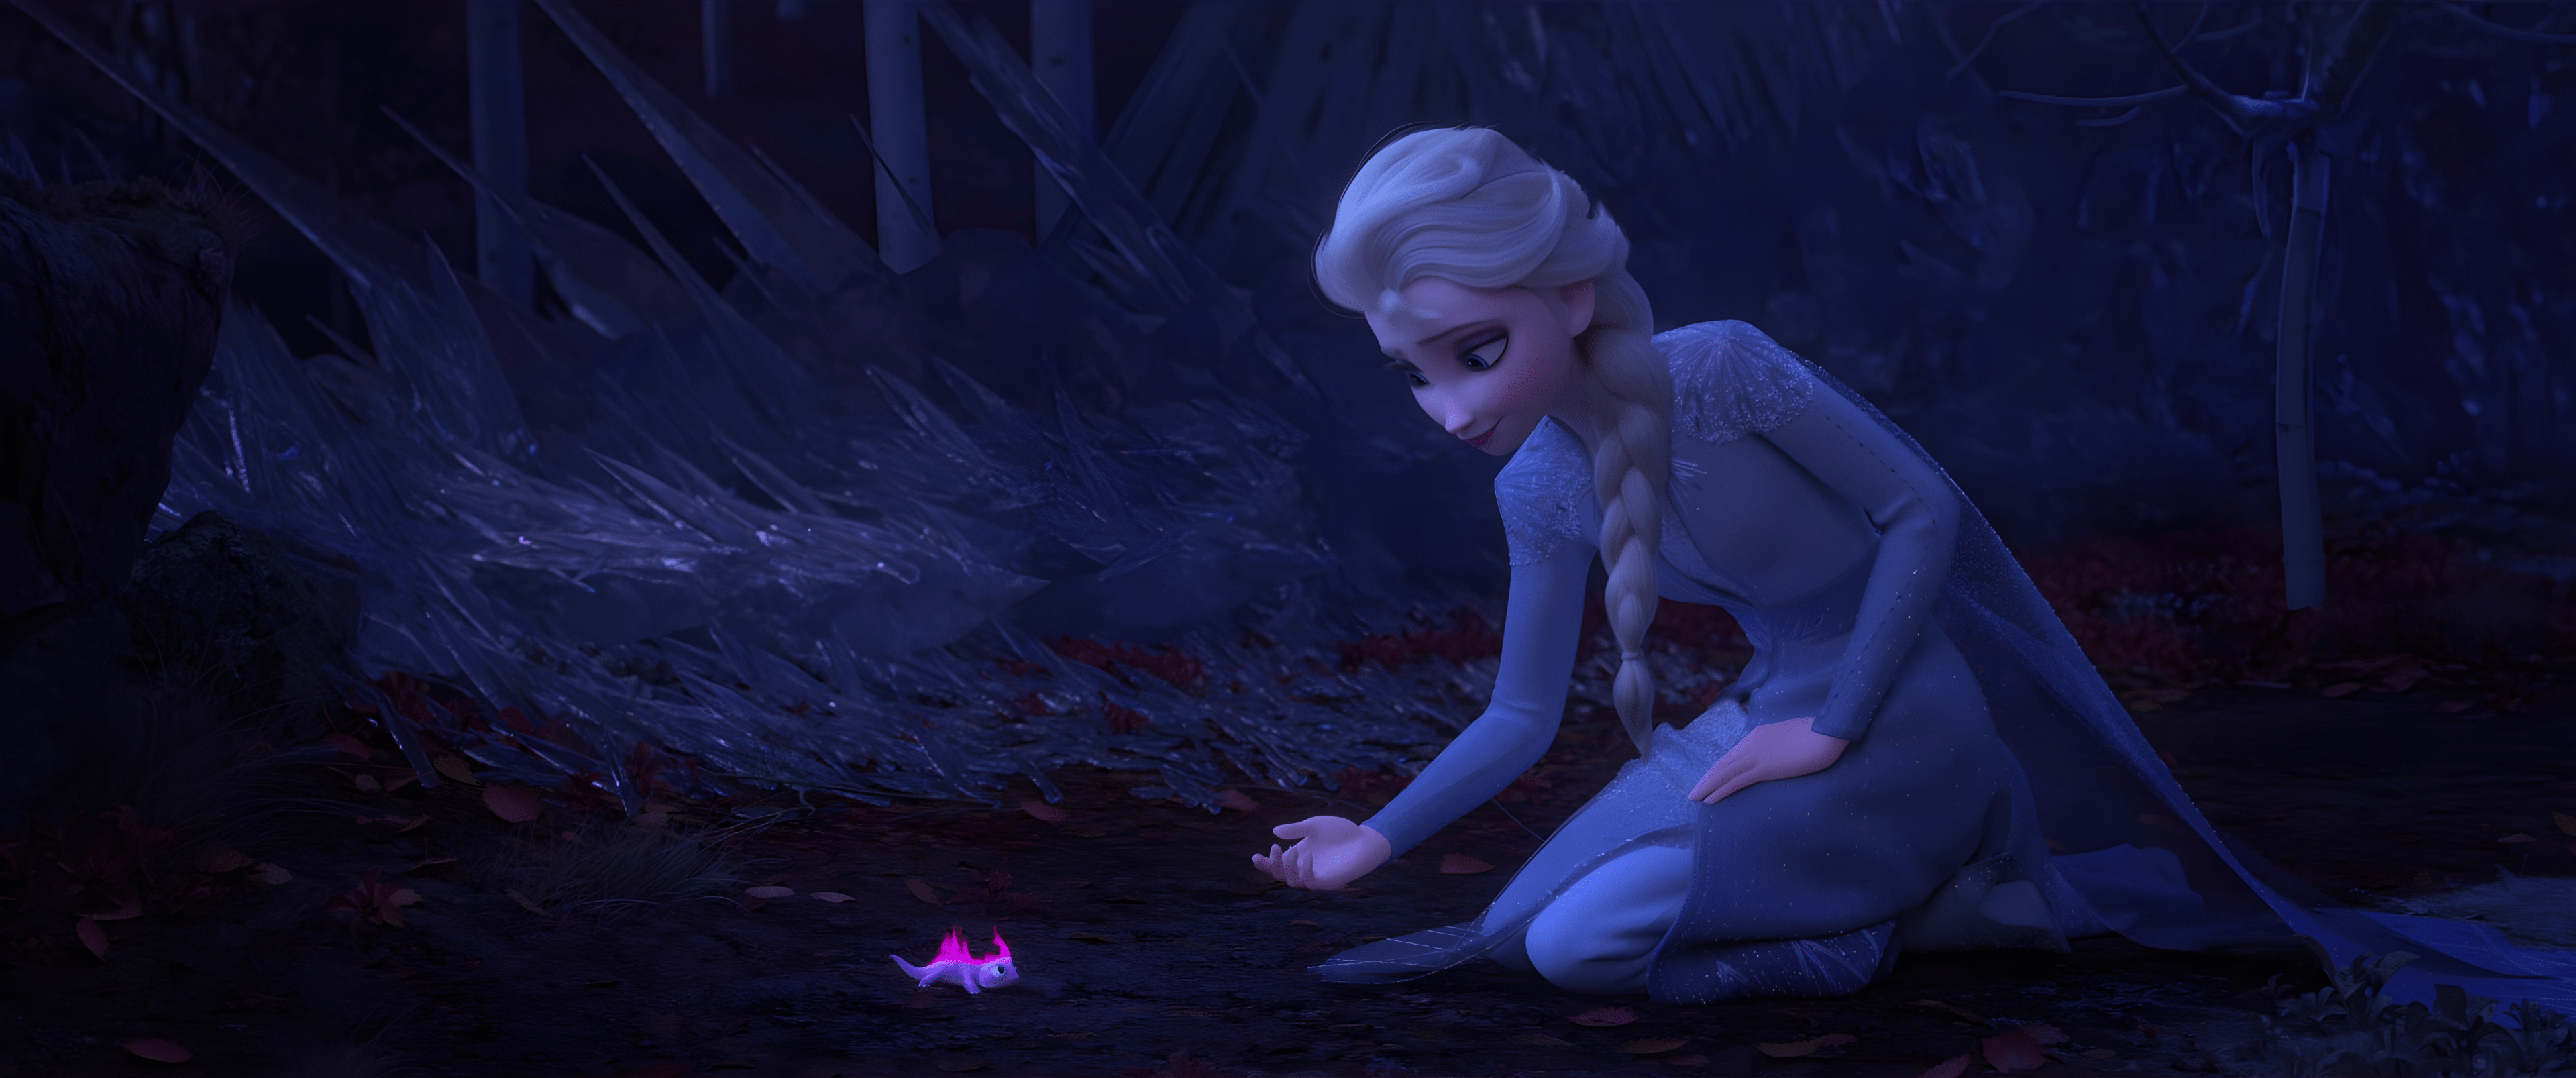 Just some cute wallpaper of Elsa. 8K download in comments